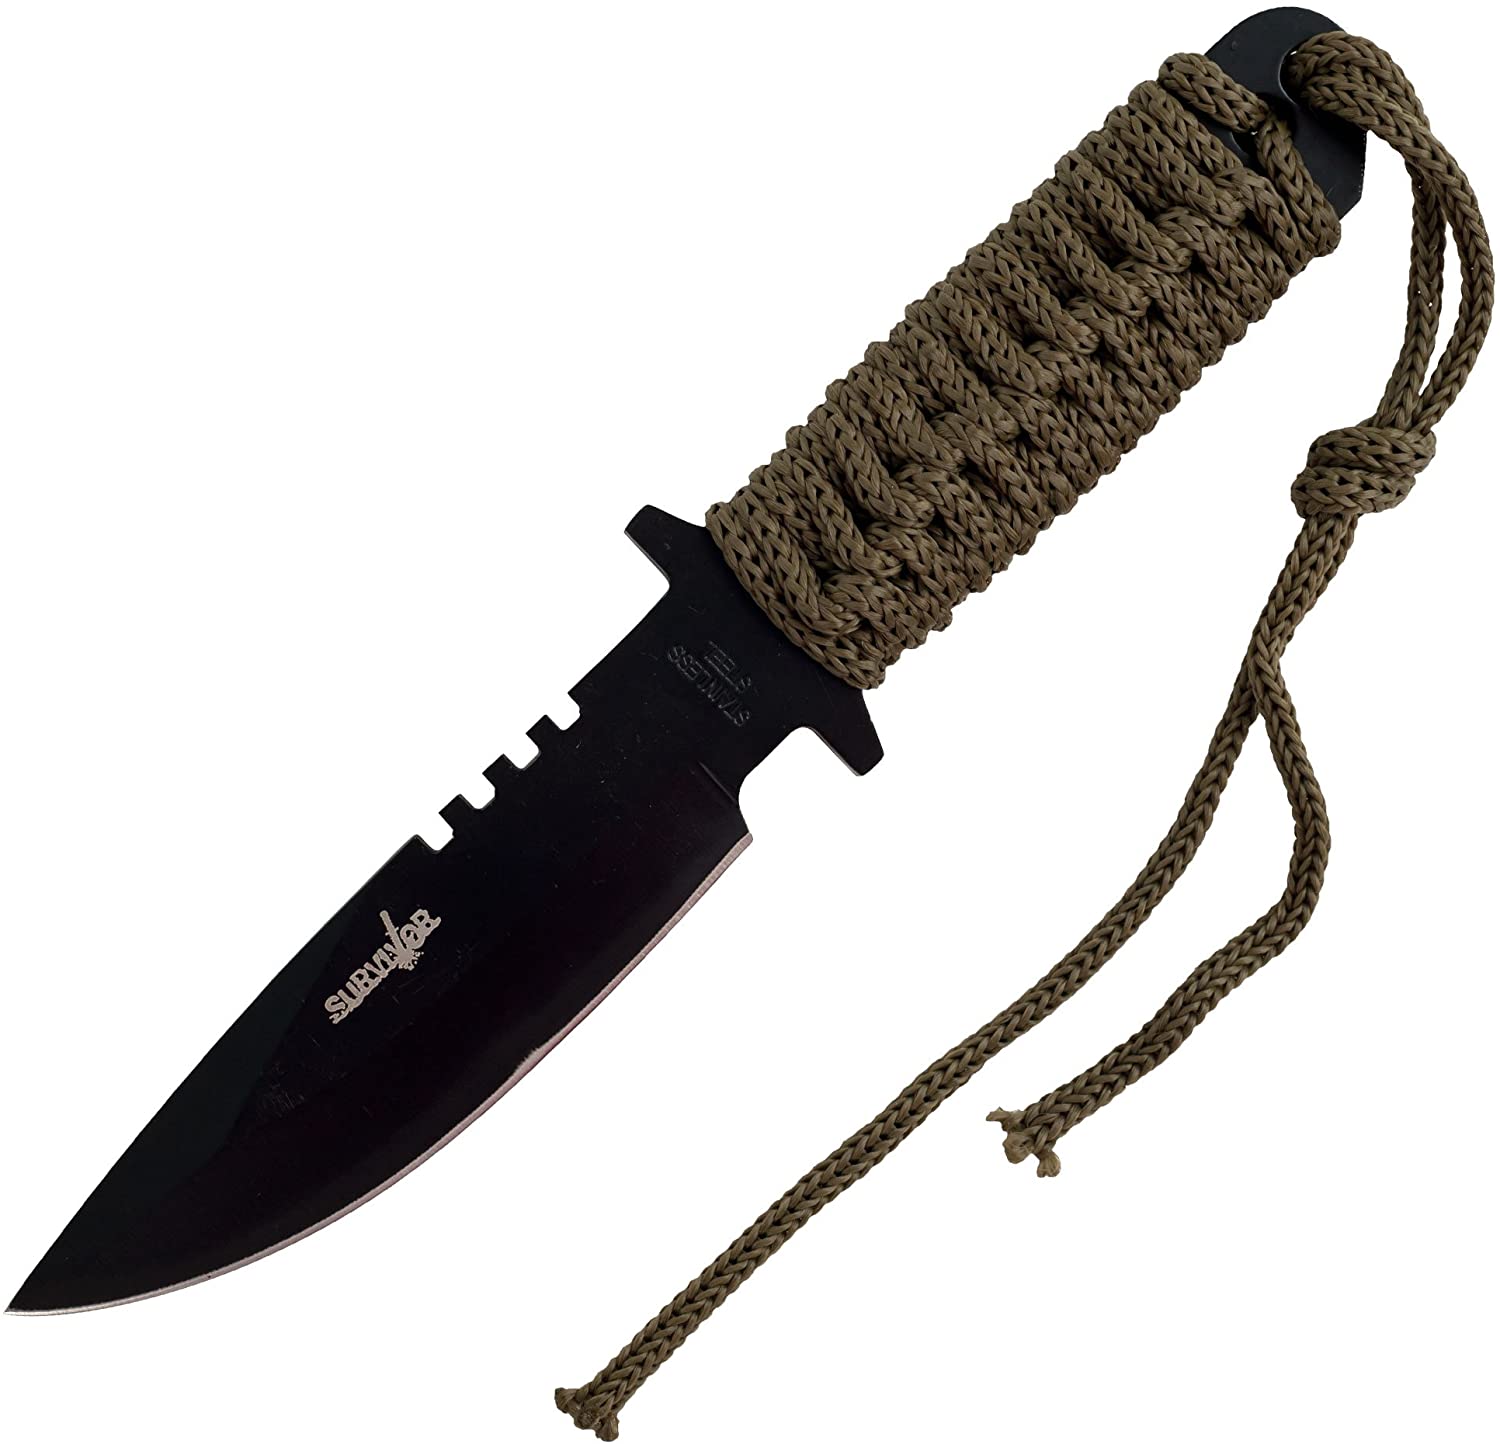 Survivor HK-7525 Fixed Blade Outdoor Knife, Black Blade, Military Green Cord-Wrapped Handle, 7.5-Inch Overall